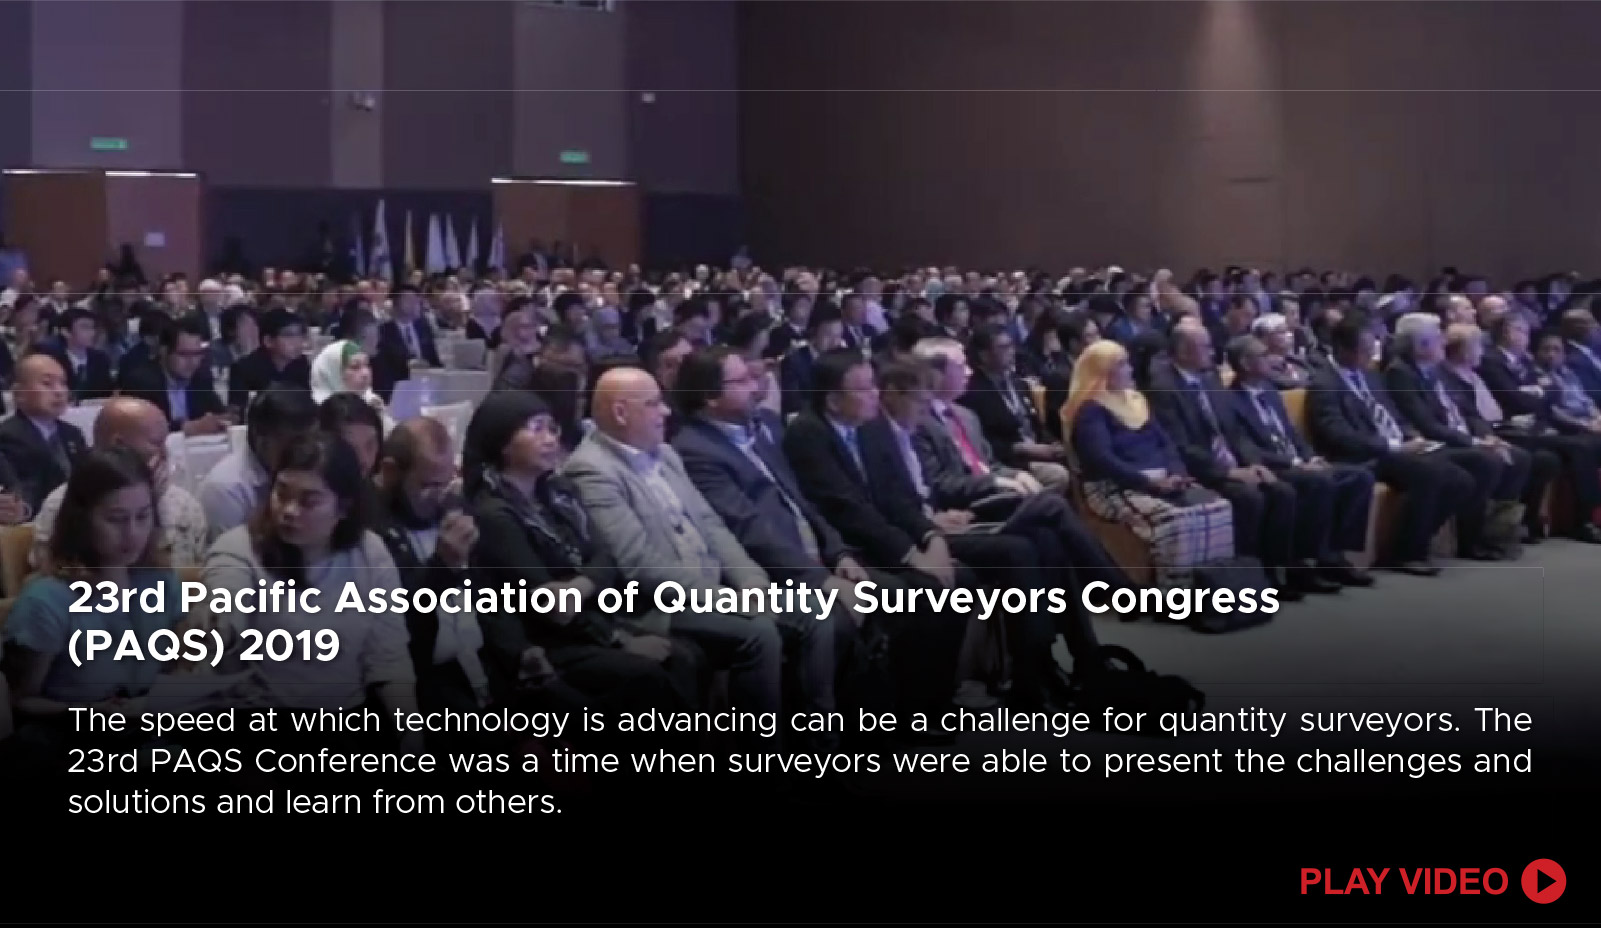 23rd Pacific Association of Quantity Surveyors Congress (PAQS) 2019